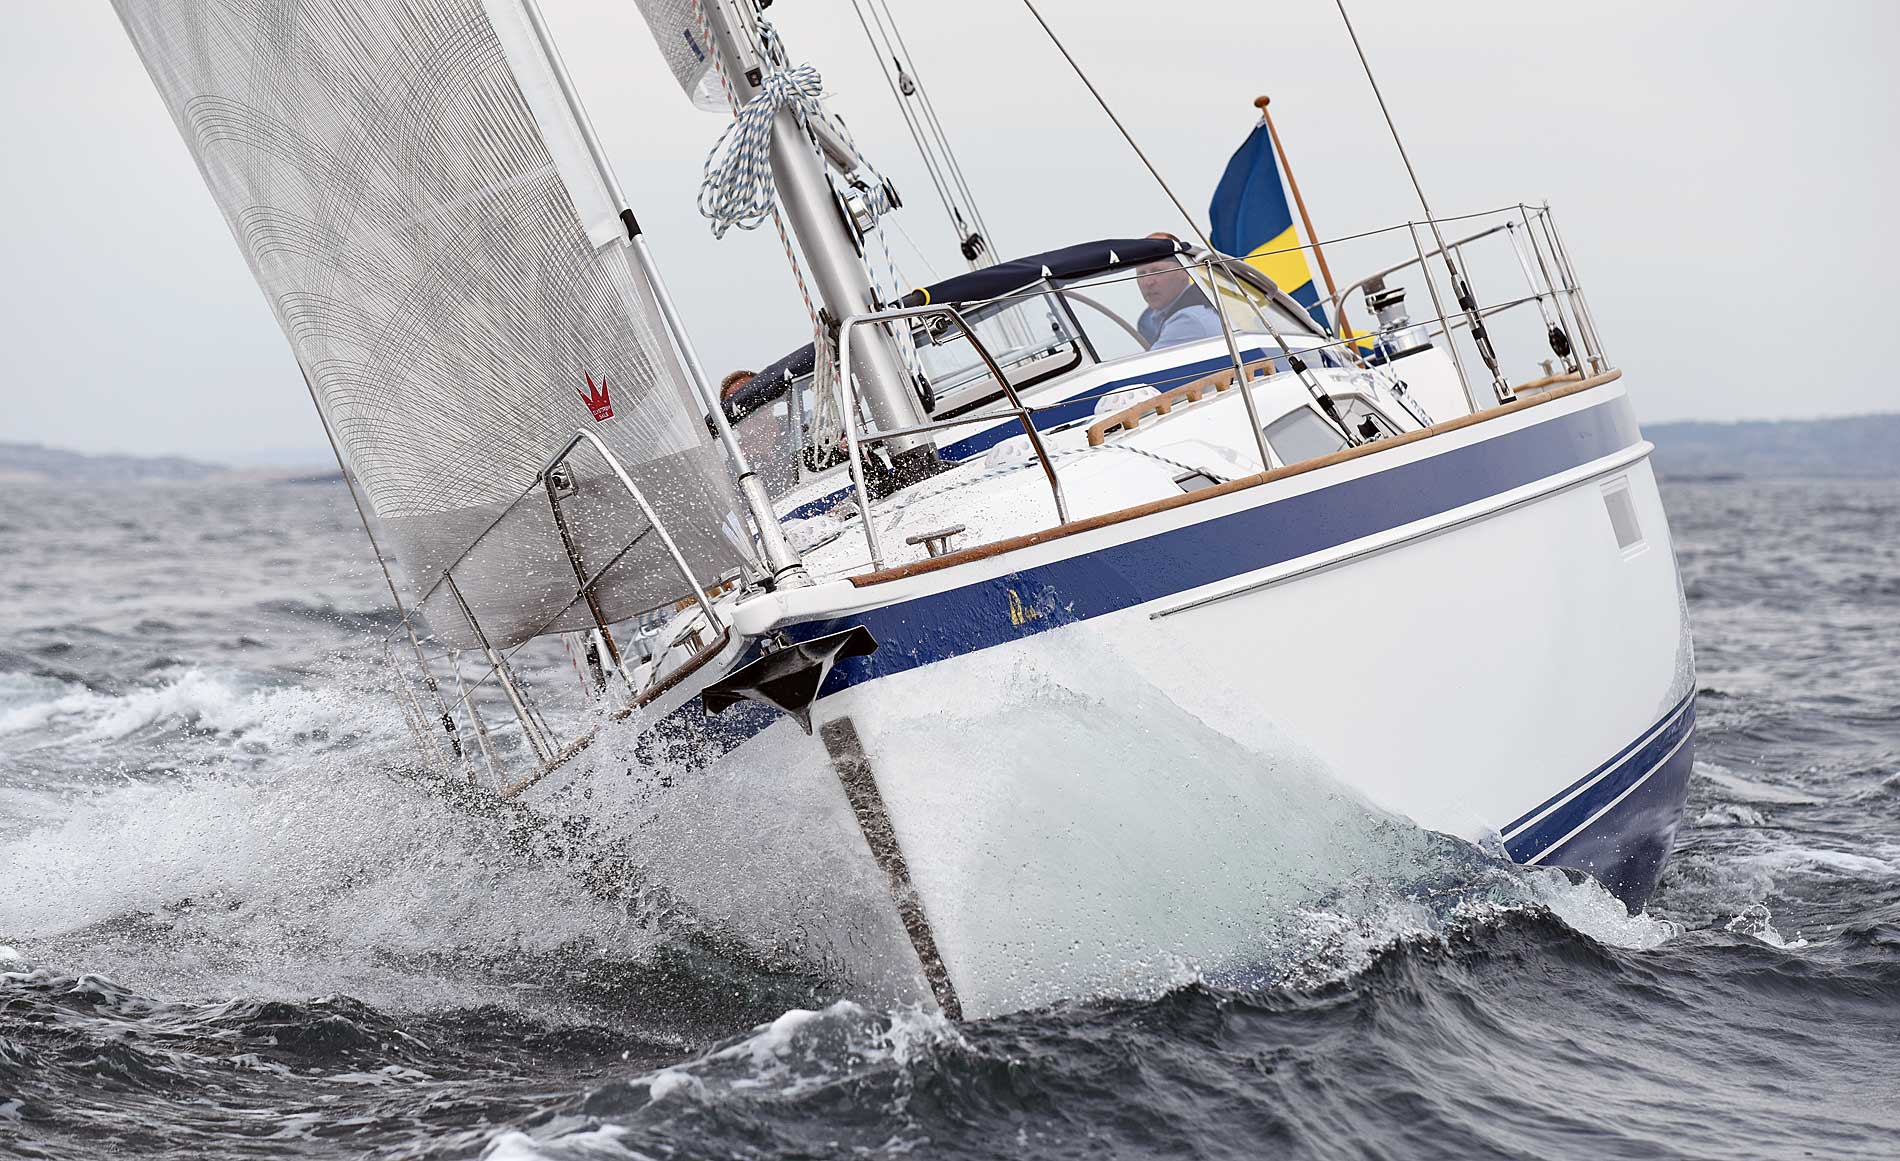 French premiere for the Hallberg-Rassy 44